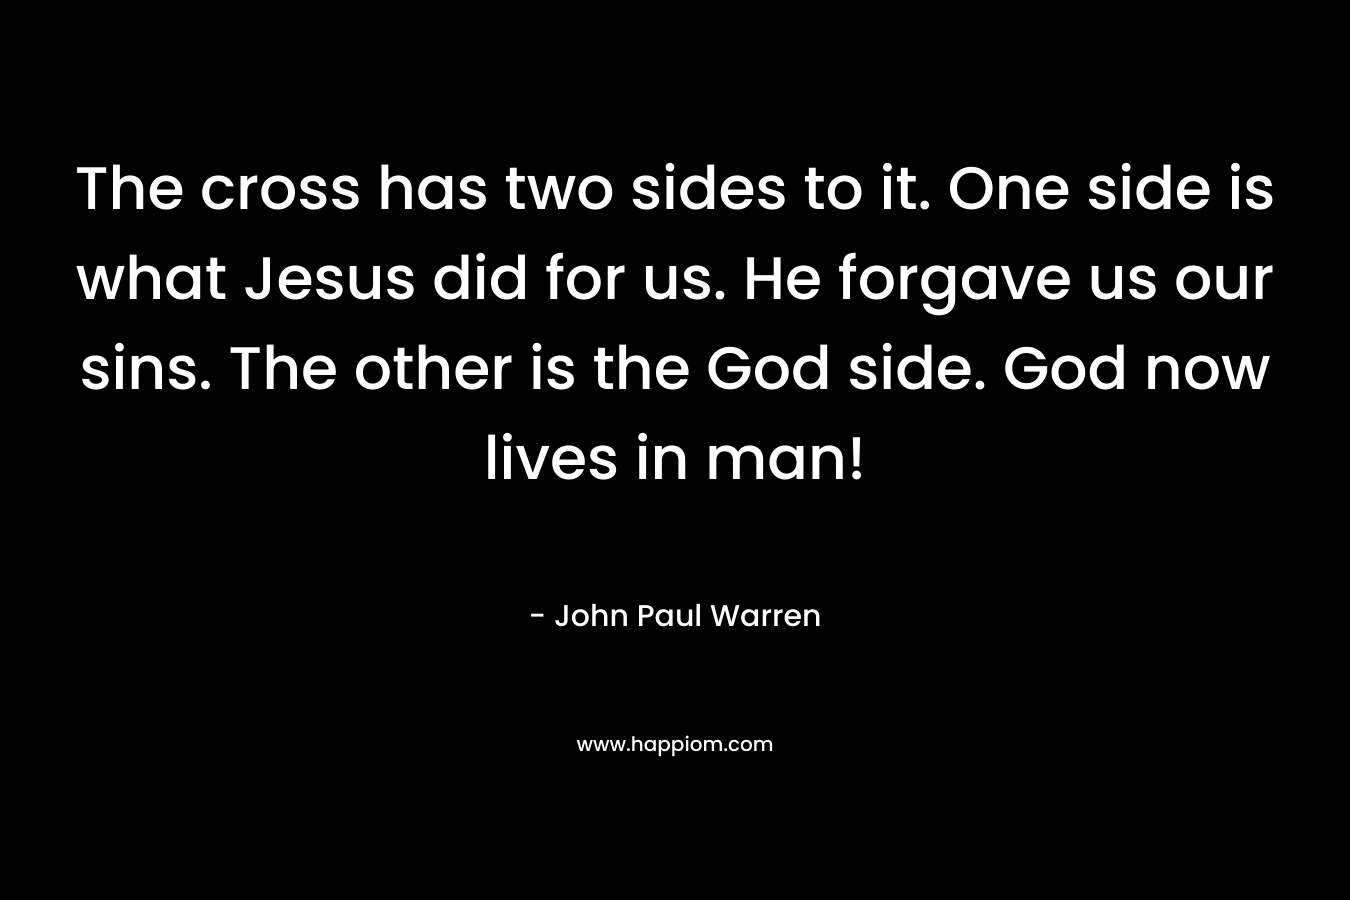 The cross has two sides to it. One side is what Jesus did for us. He forgave us our sins. The other is the God side. God now lives in man! – John Paul Warren